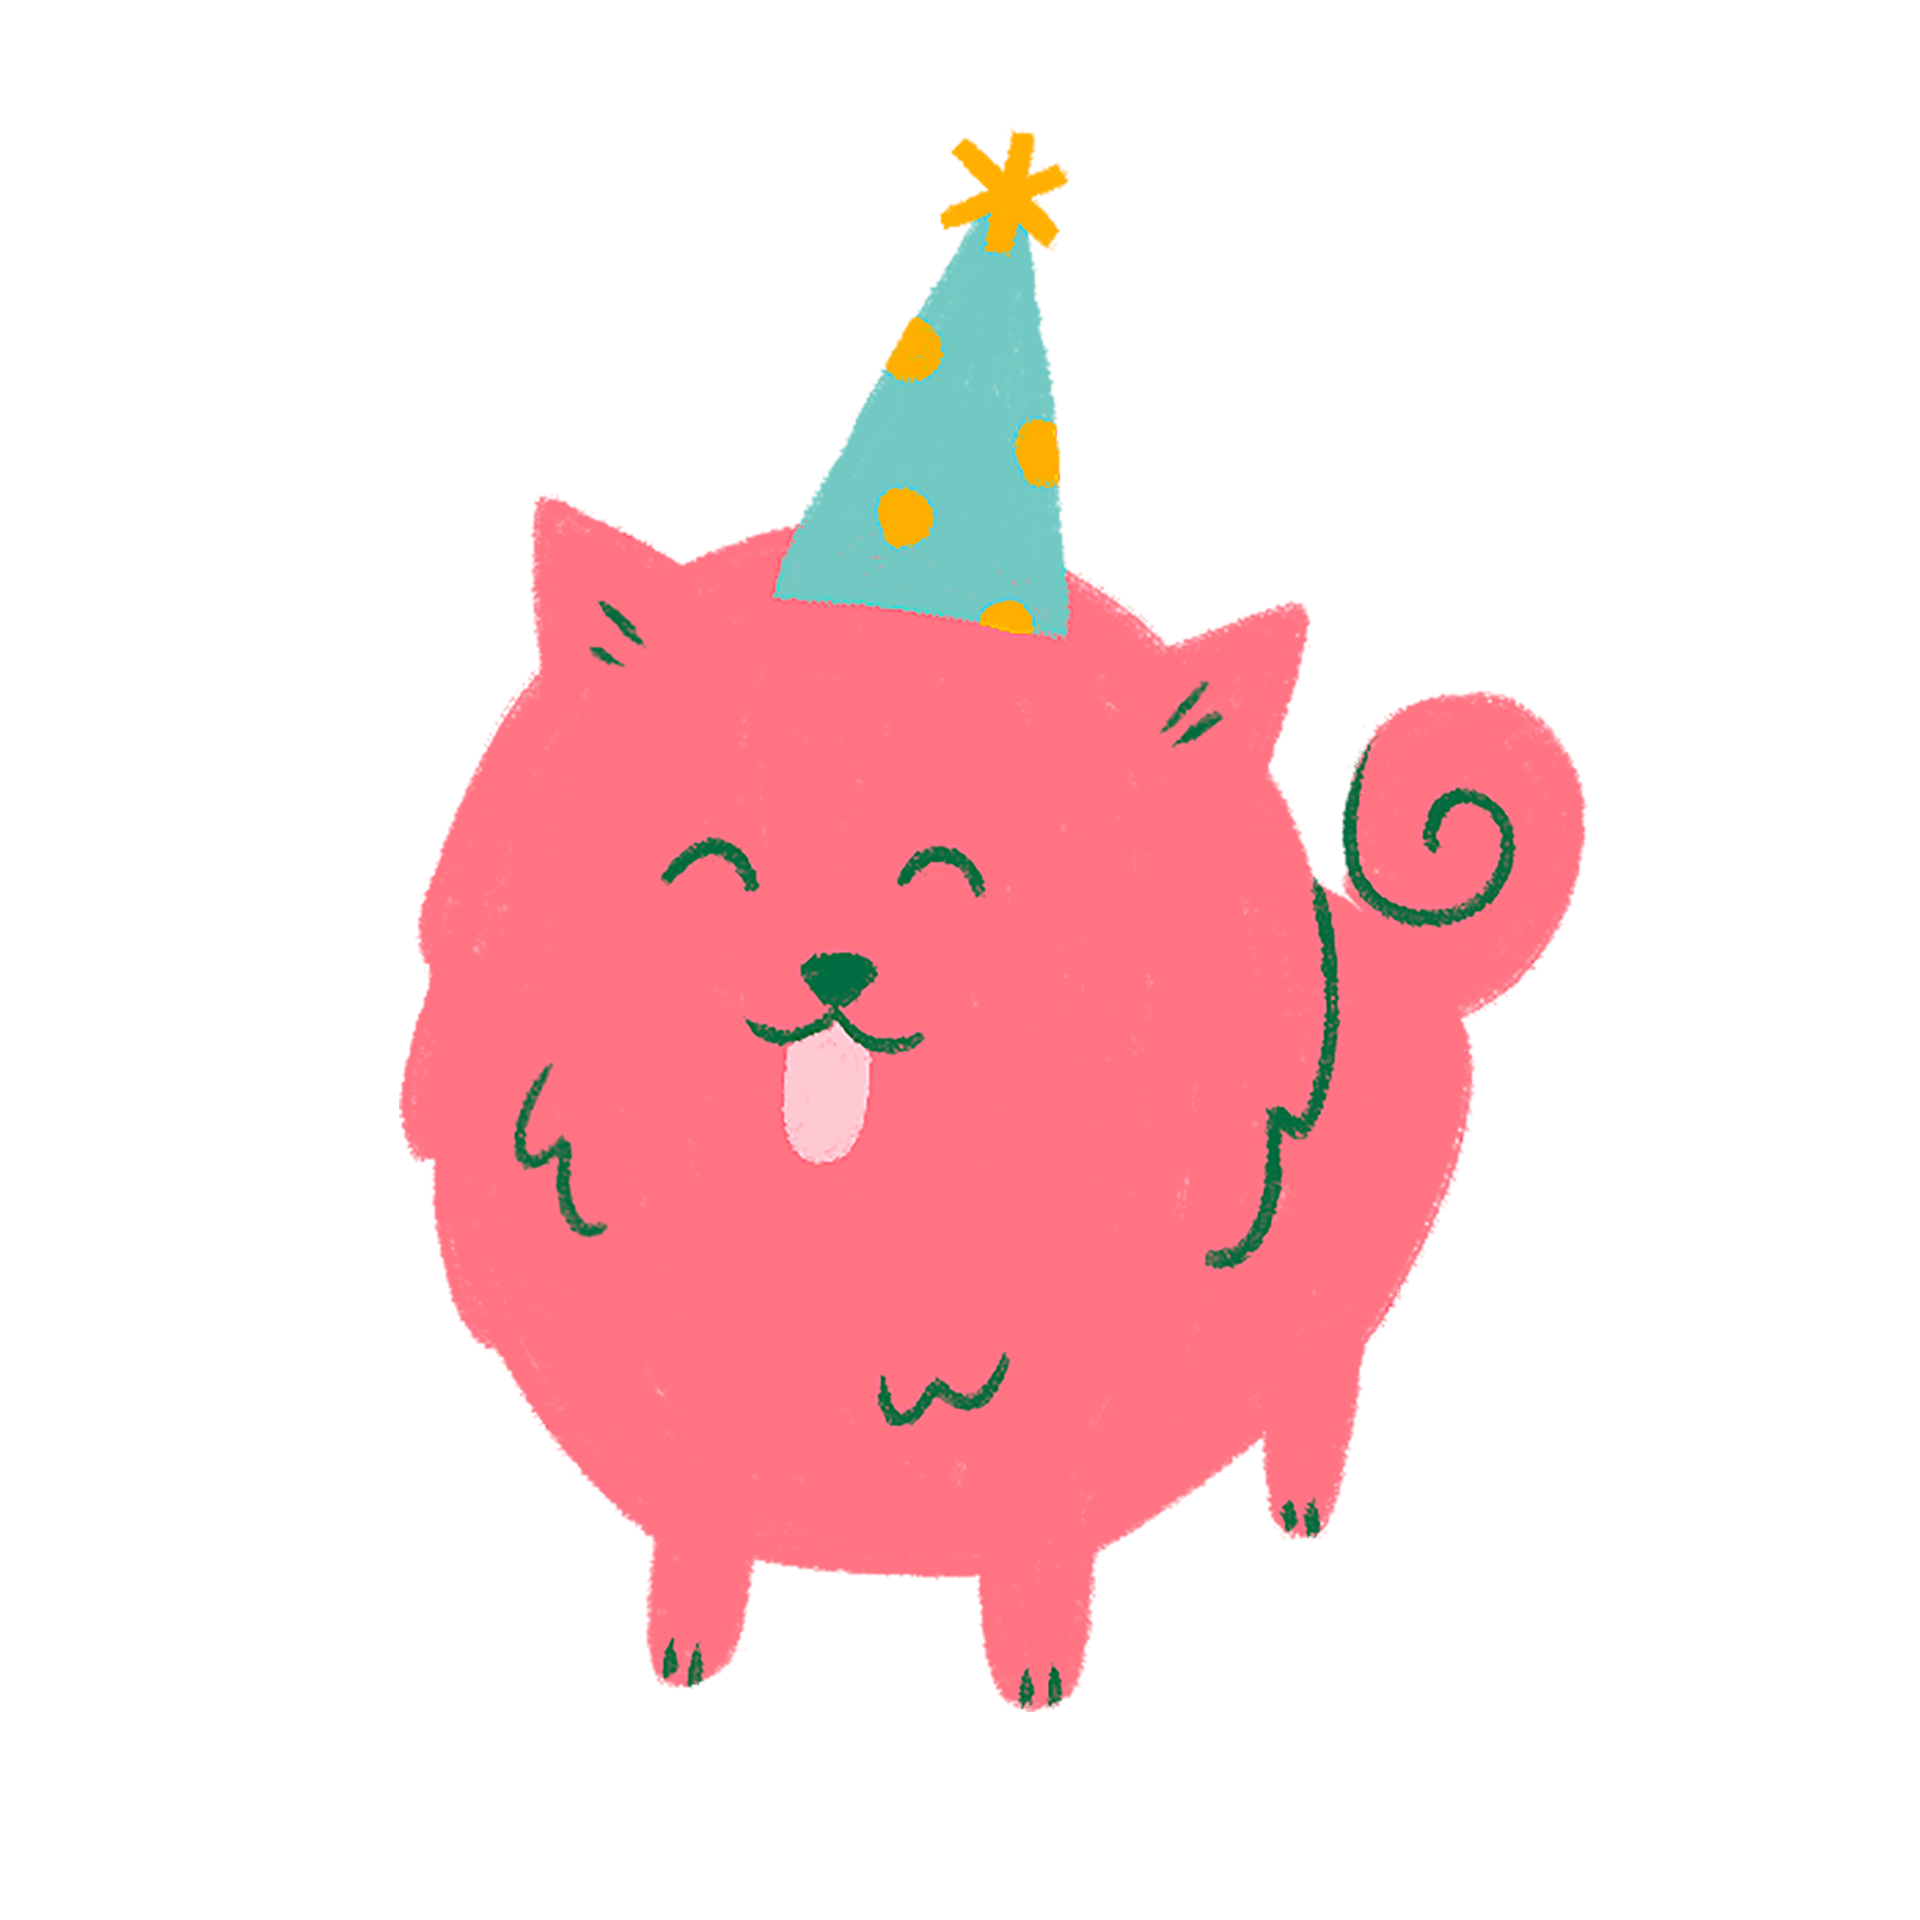 An illustration of a pink pomeranian with a blue party hat on